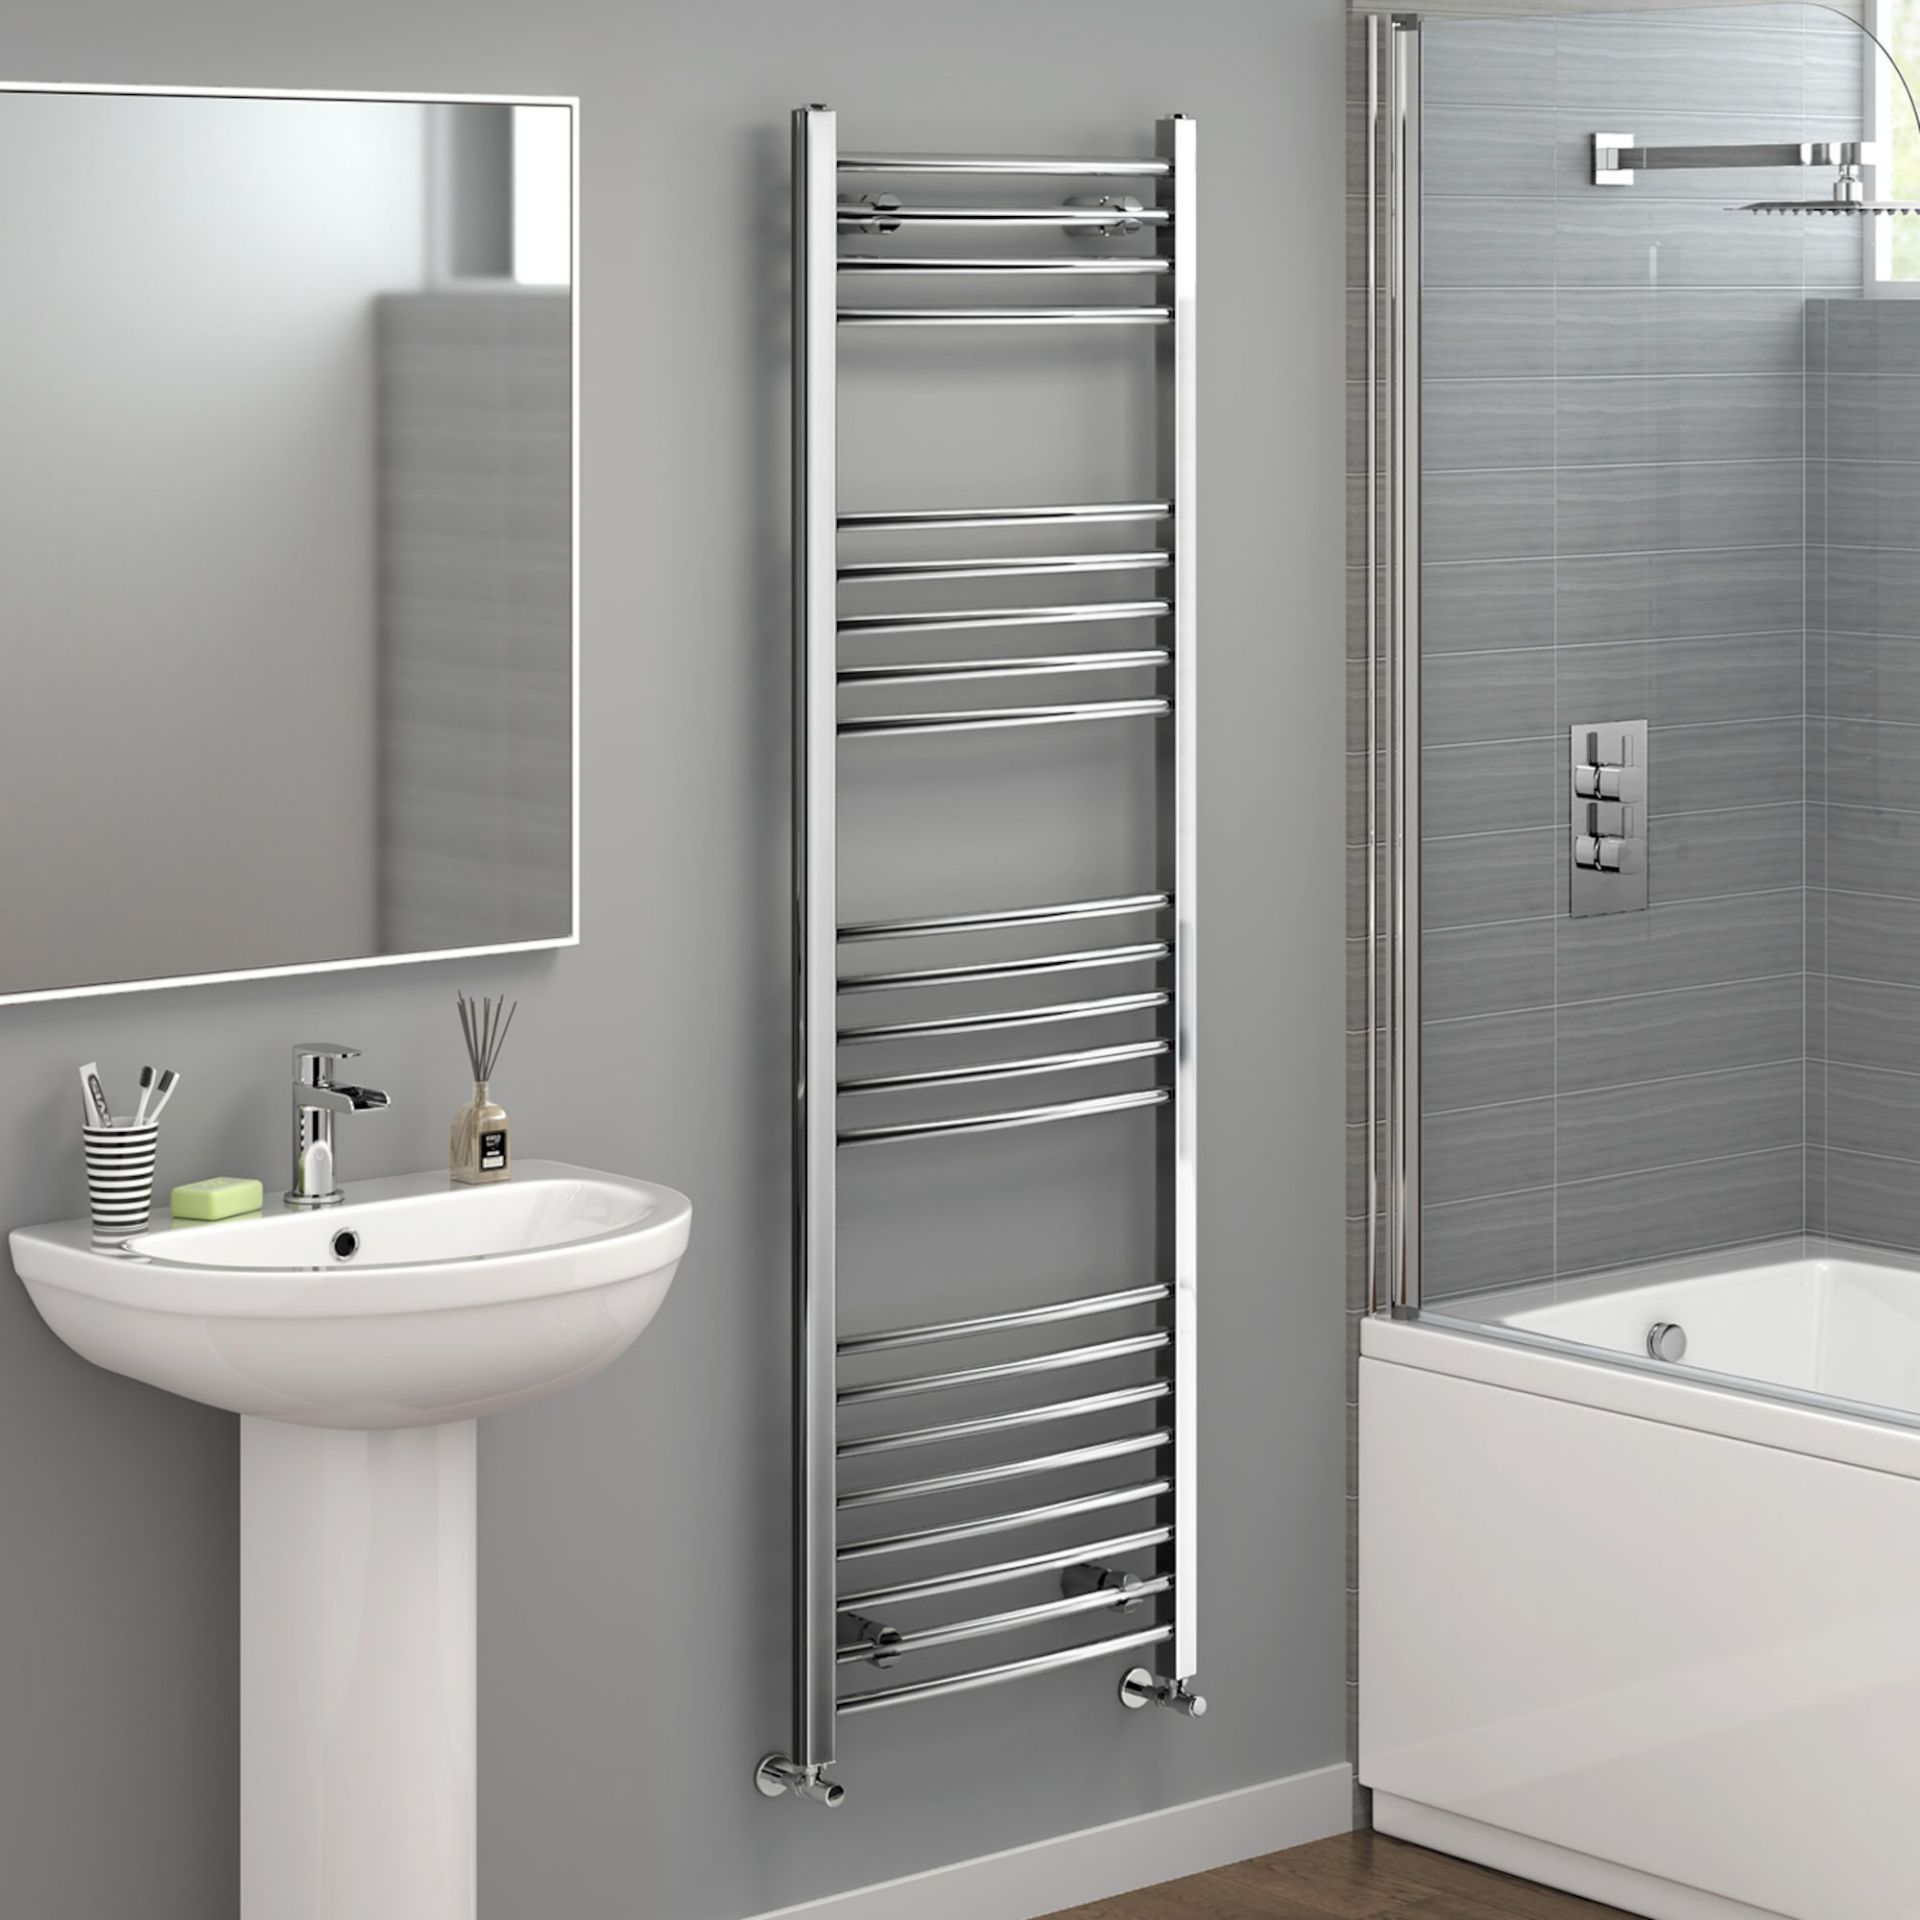 (JM49) 1600x500mm - 20mm Tubes - Chrome Curved Rail Ladder Towel Radiator. Made from chrome plated